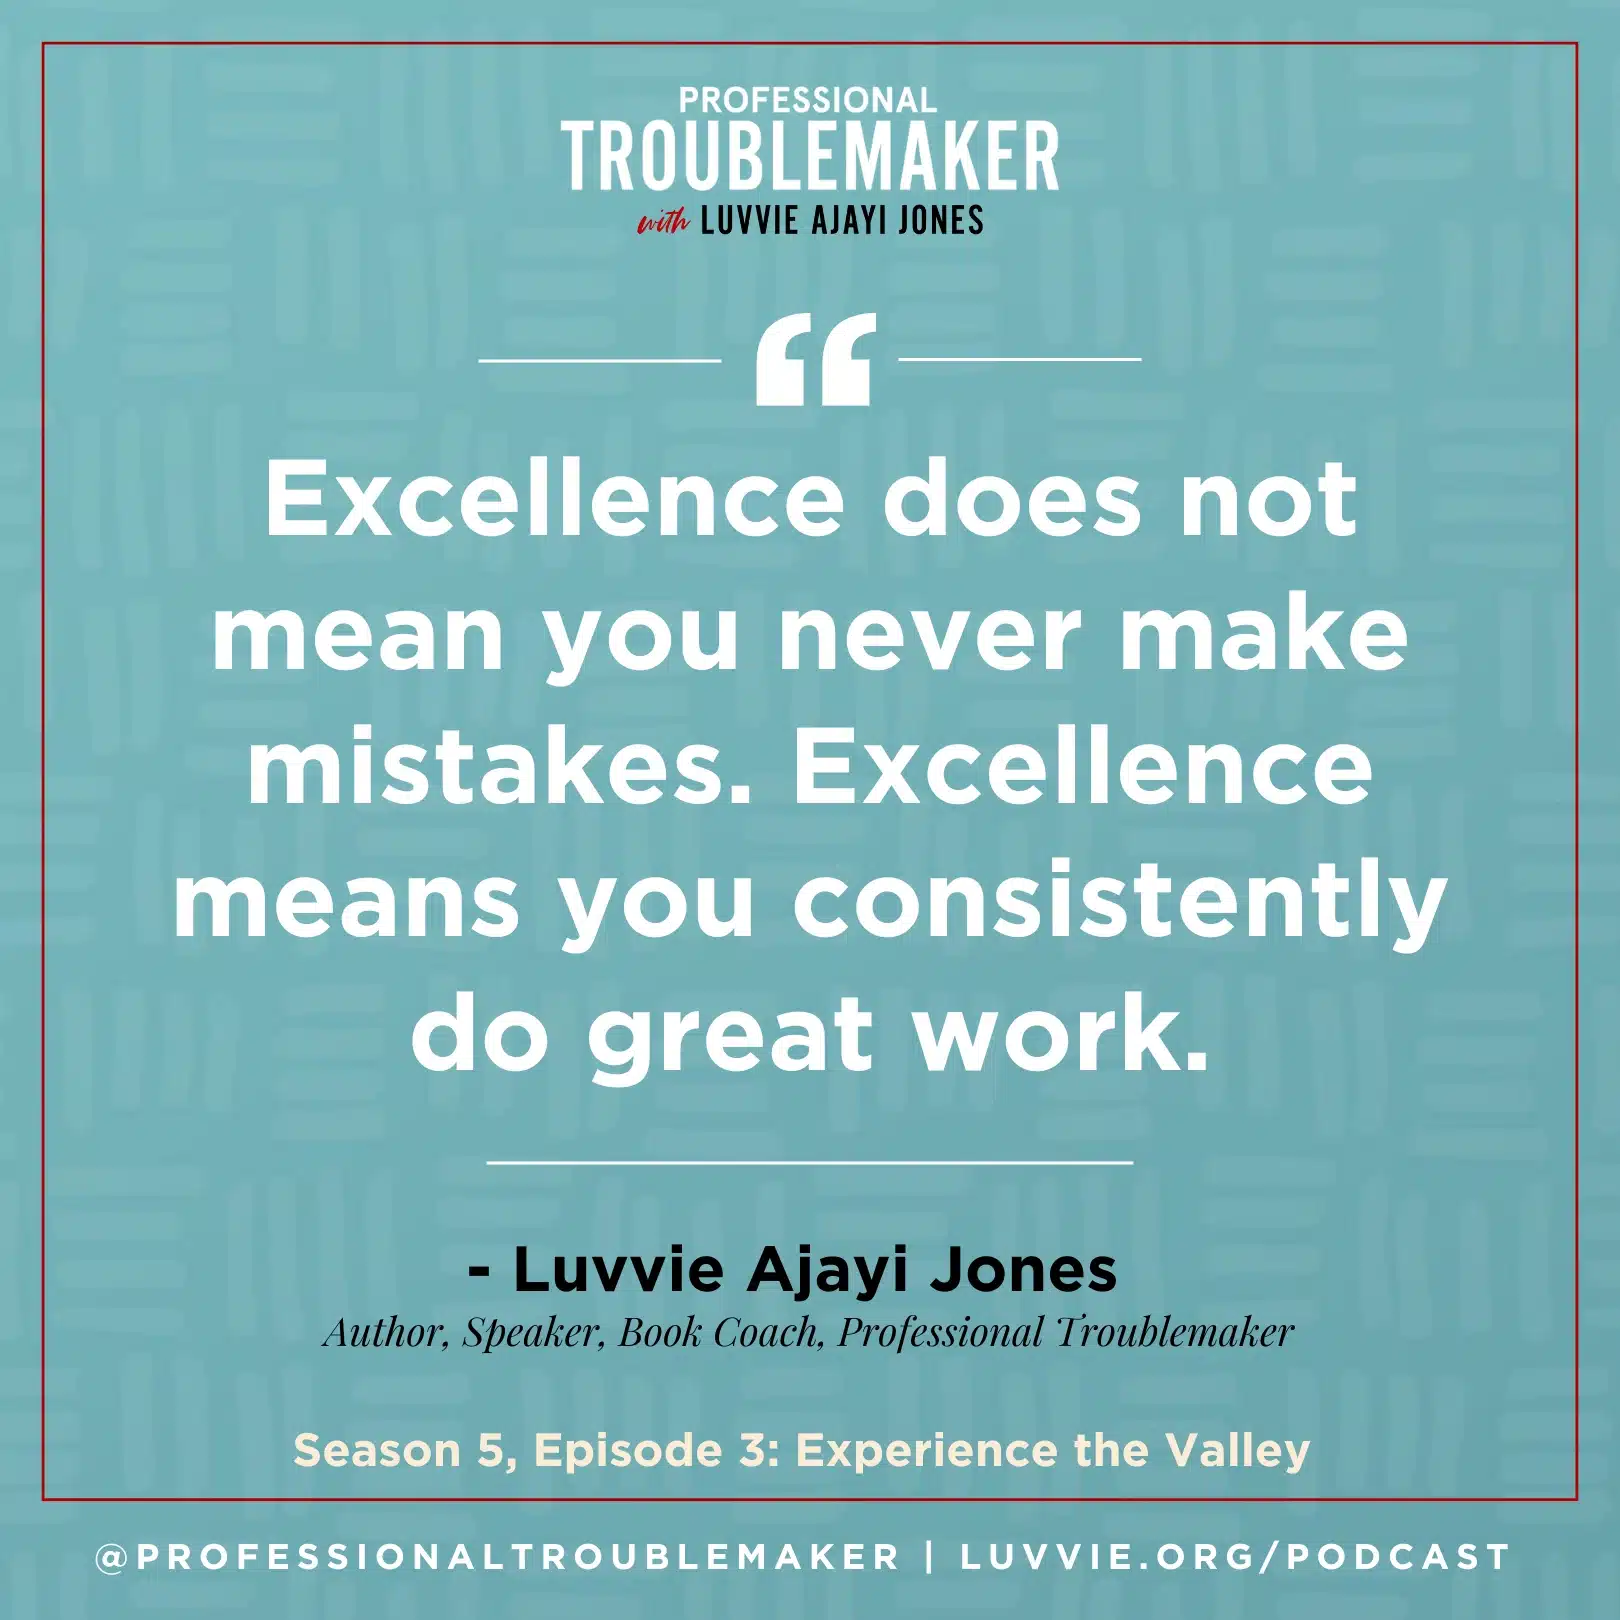 Excellence means you consistently do great work - Podcast Quote Graphic